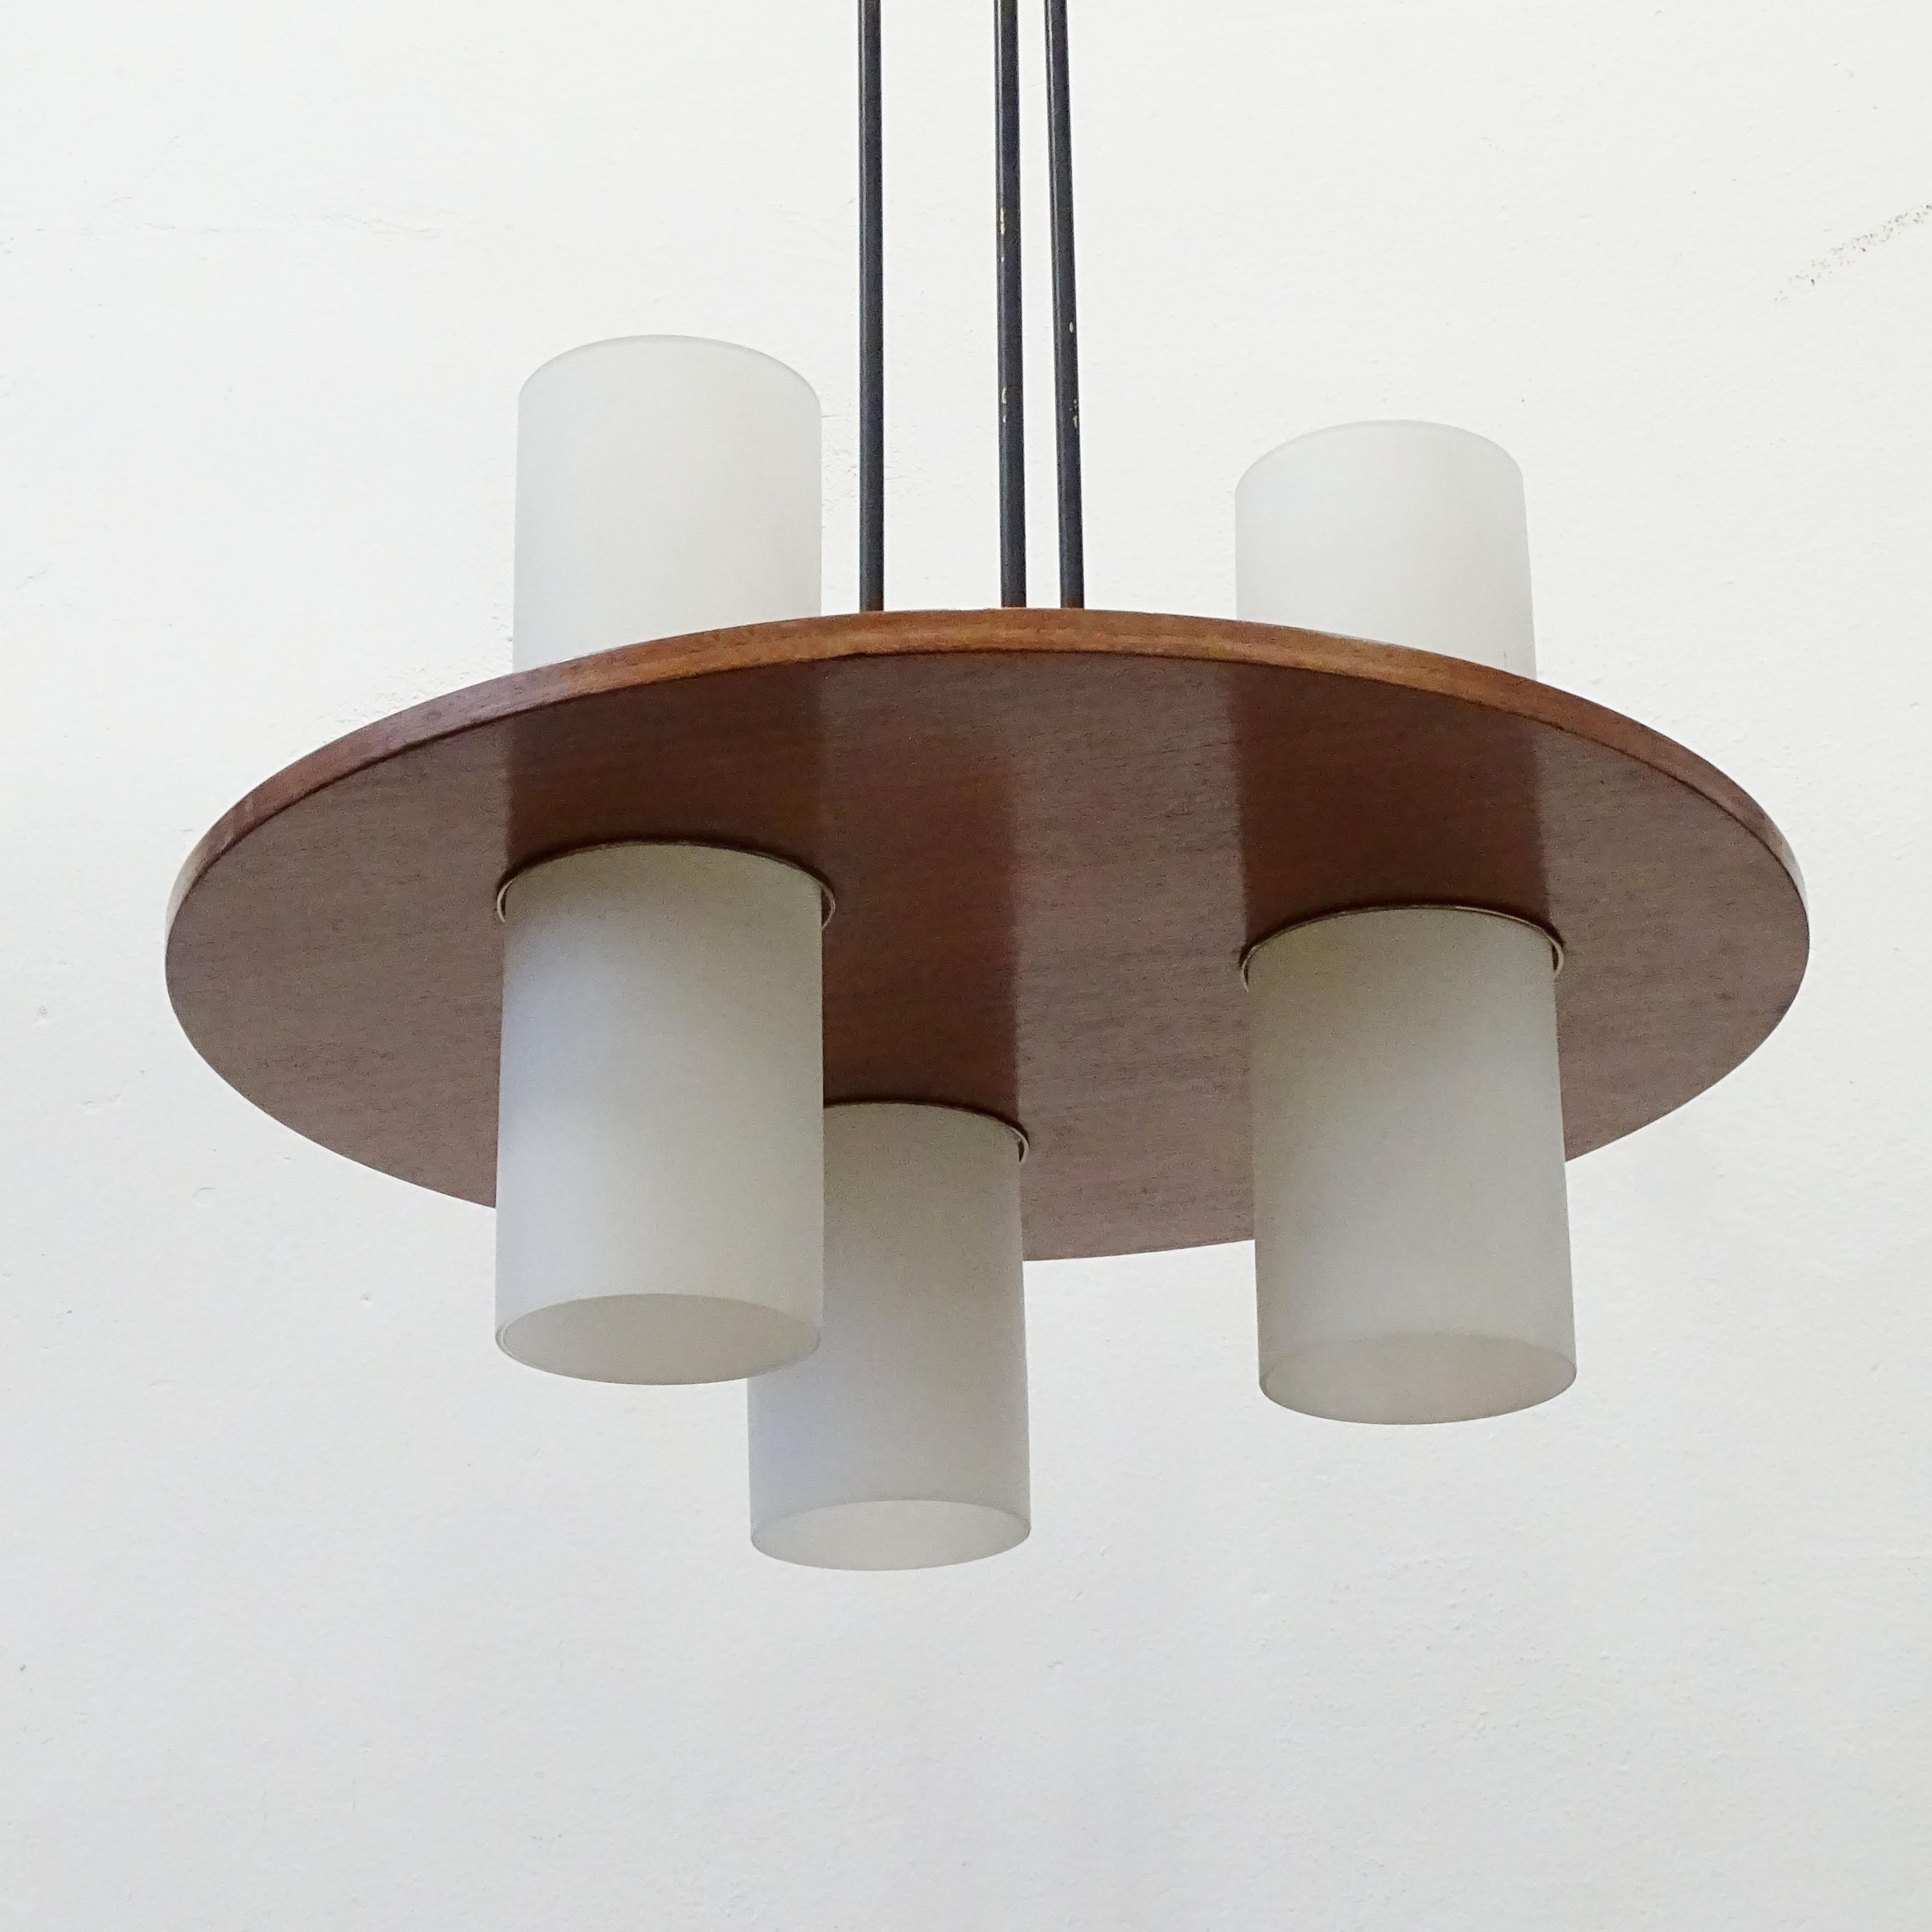 Mid-20th Century Elegant Italian 1950s Teak and Opaline Glass Cylinders Ceiling Lamp For Sale